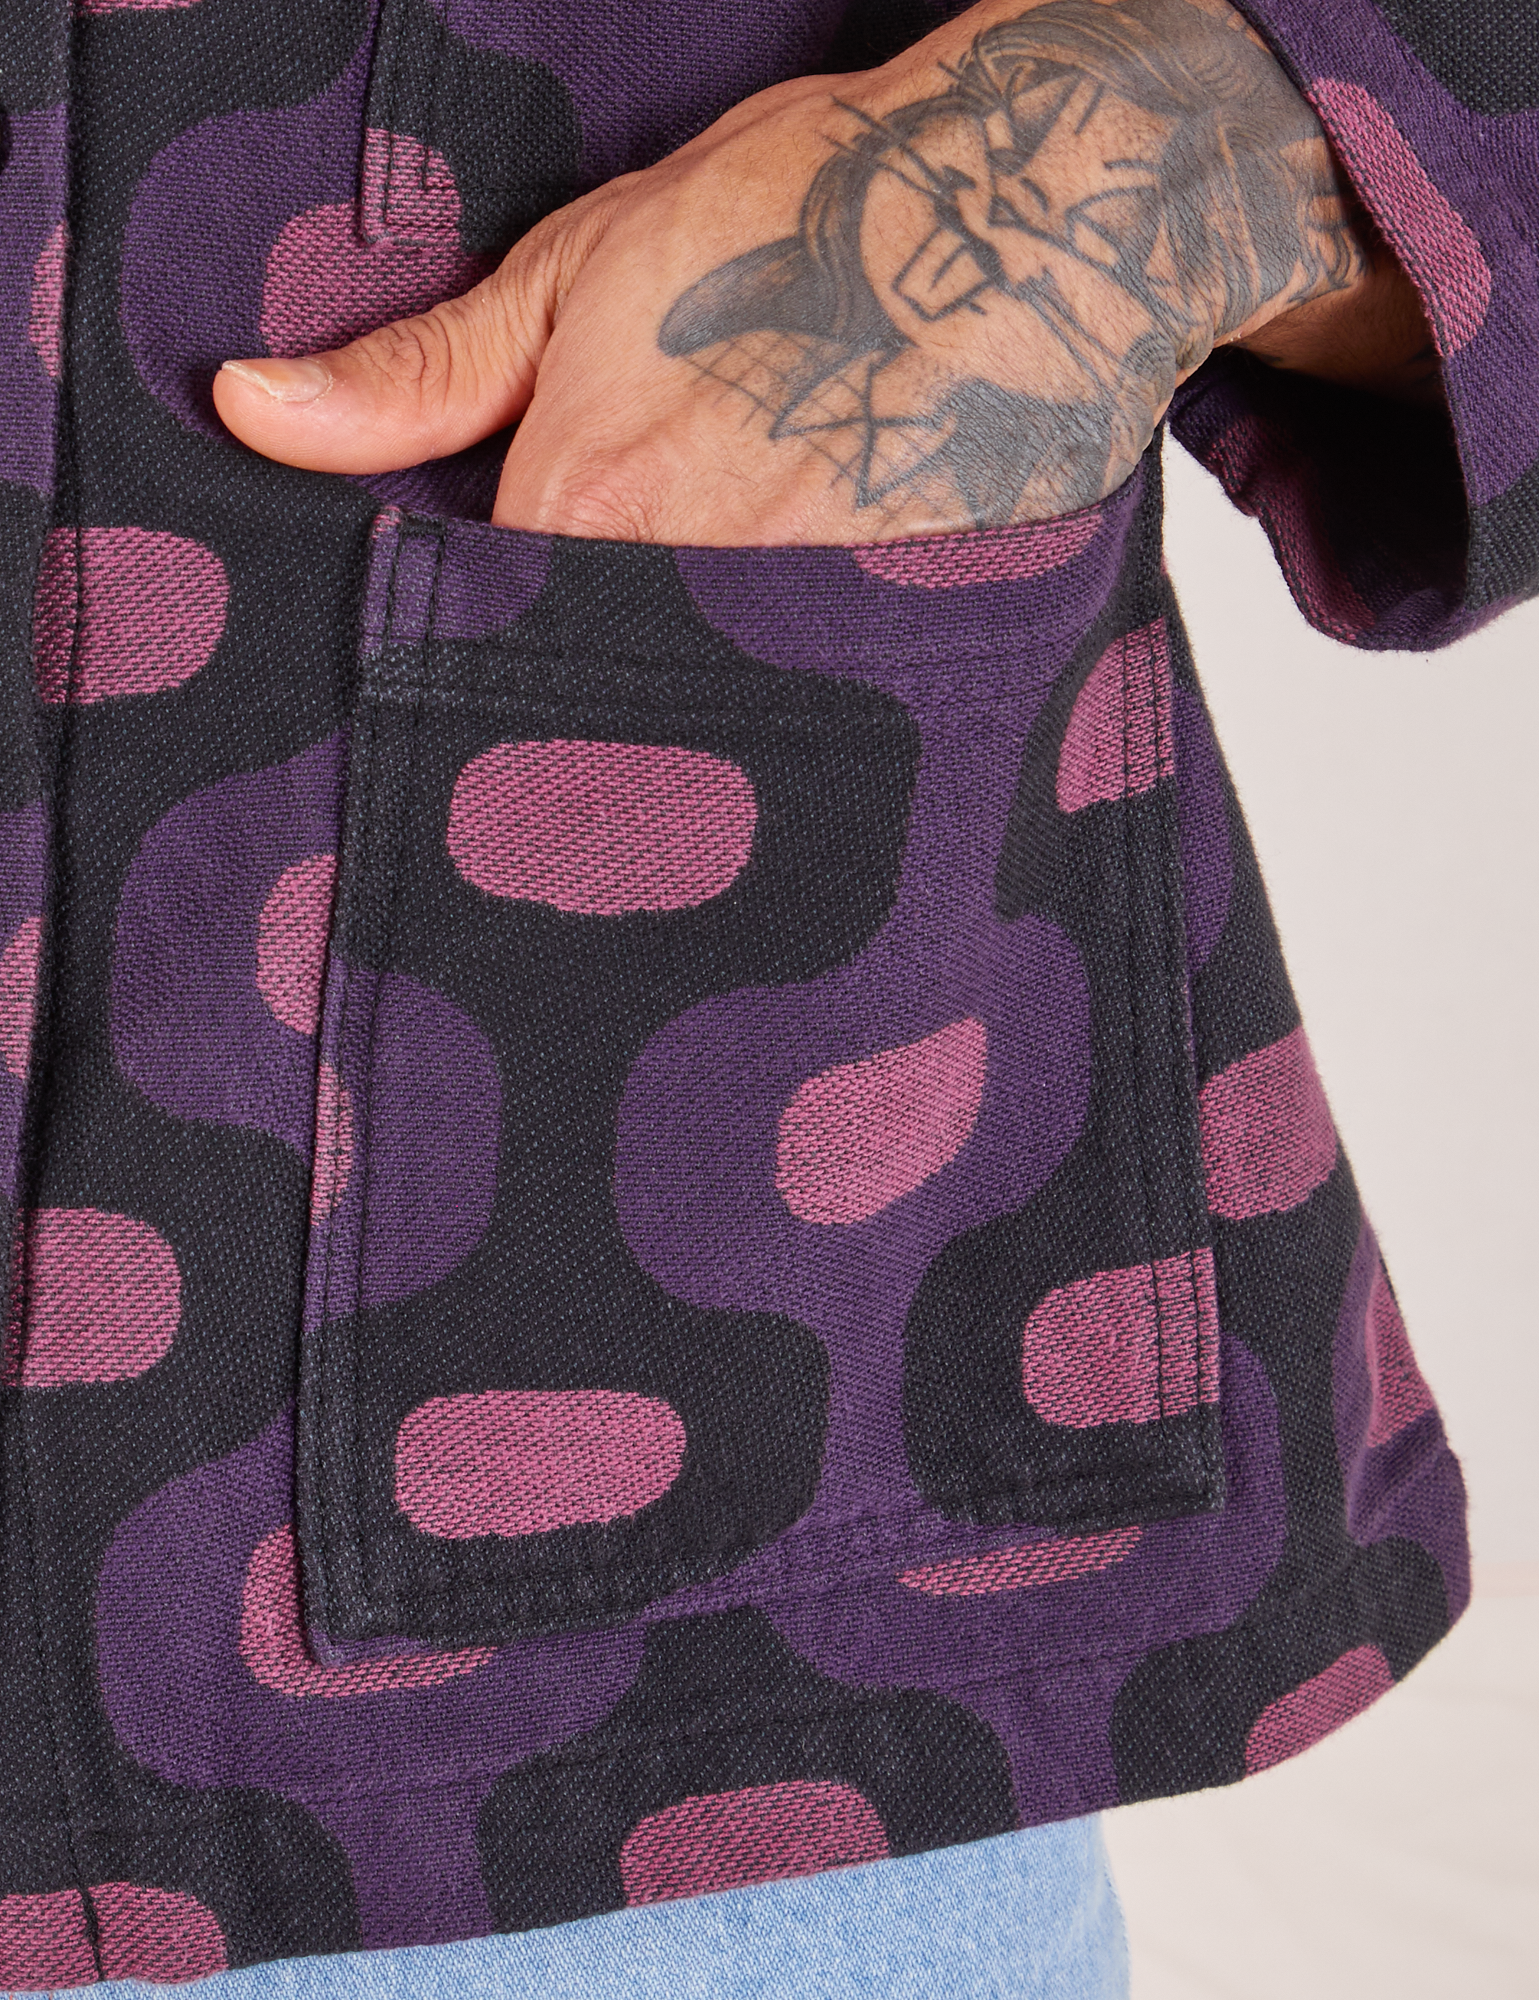  Purple Tile Jacquard Work Jacket front pocket close up. Jesse has their hand in the pocket.